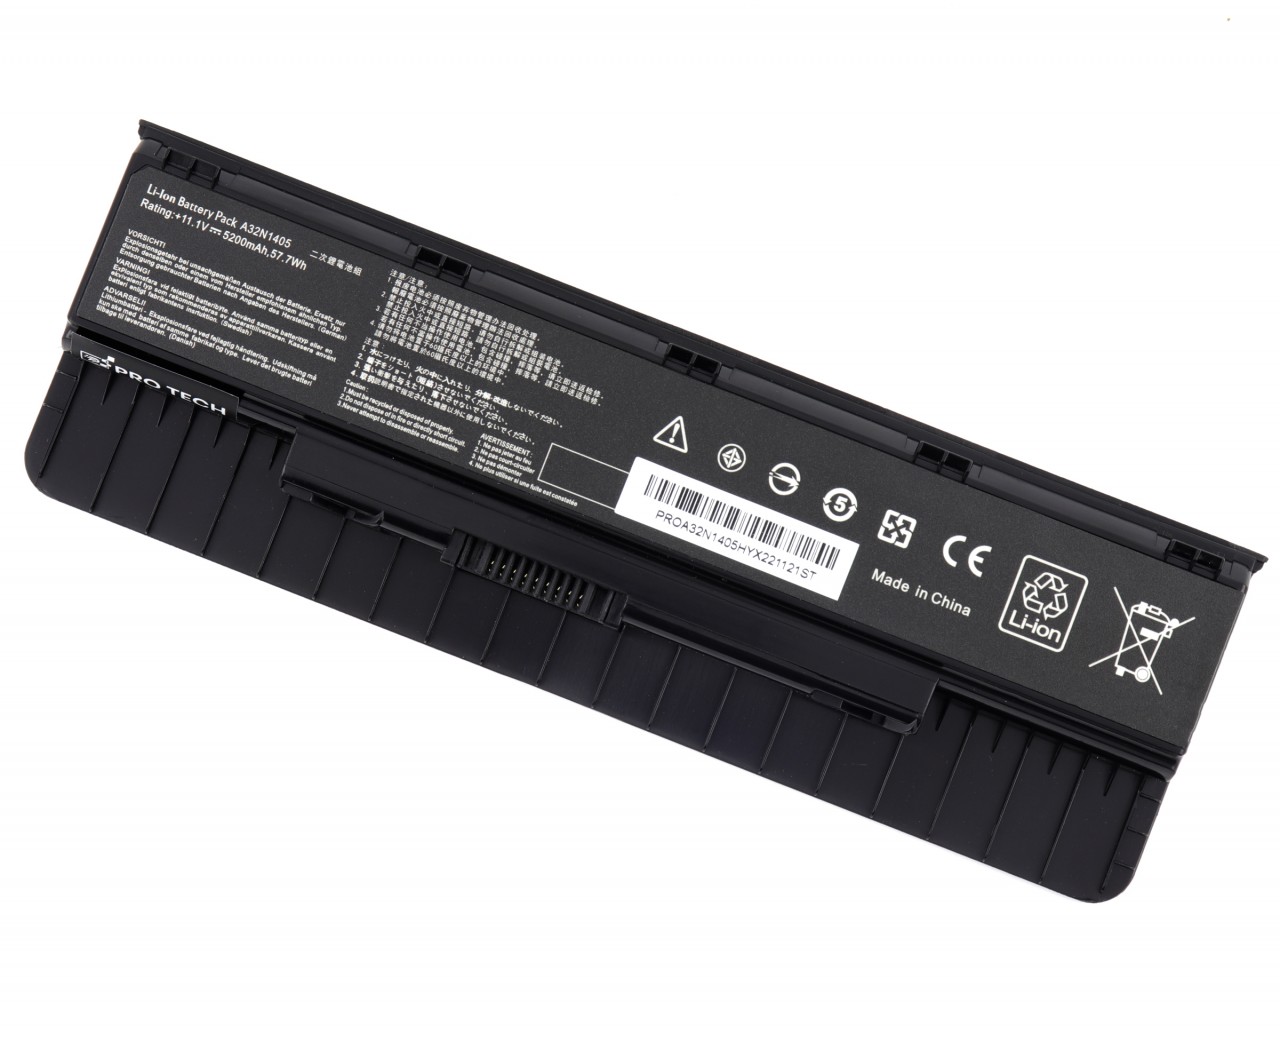 Baterie Asus N76VJ-T4016H 57.7Wh / 5200mAh Protech High Quality Replacement